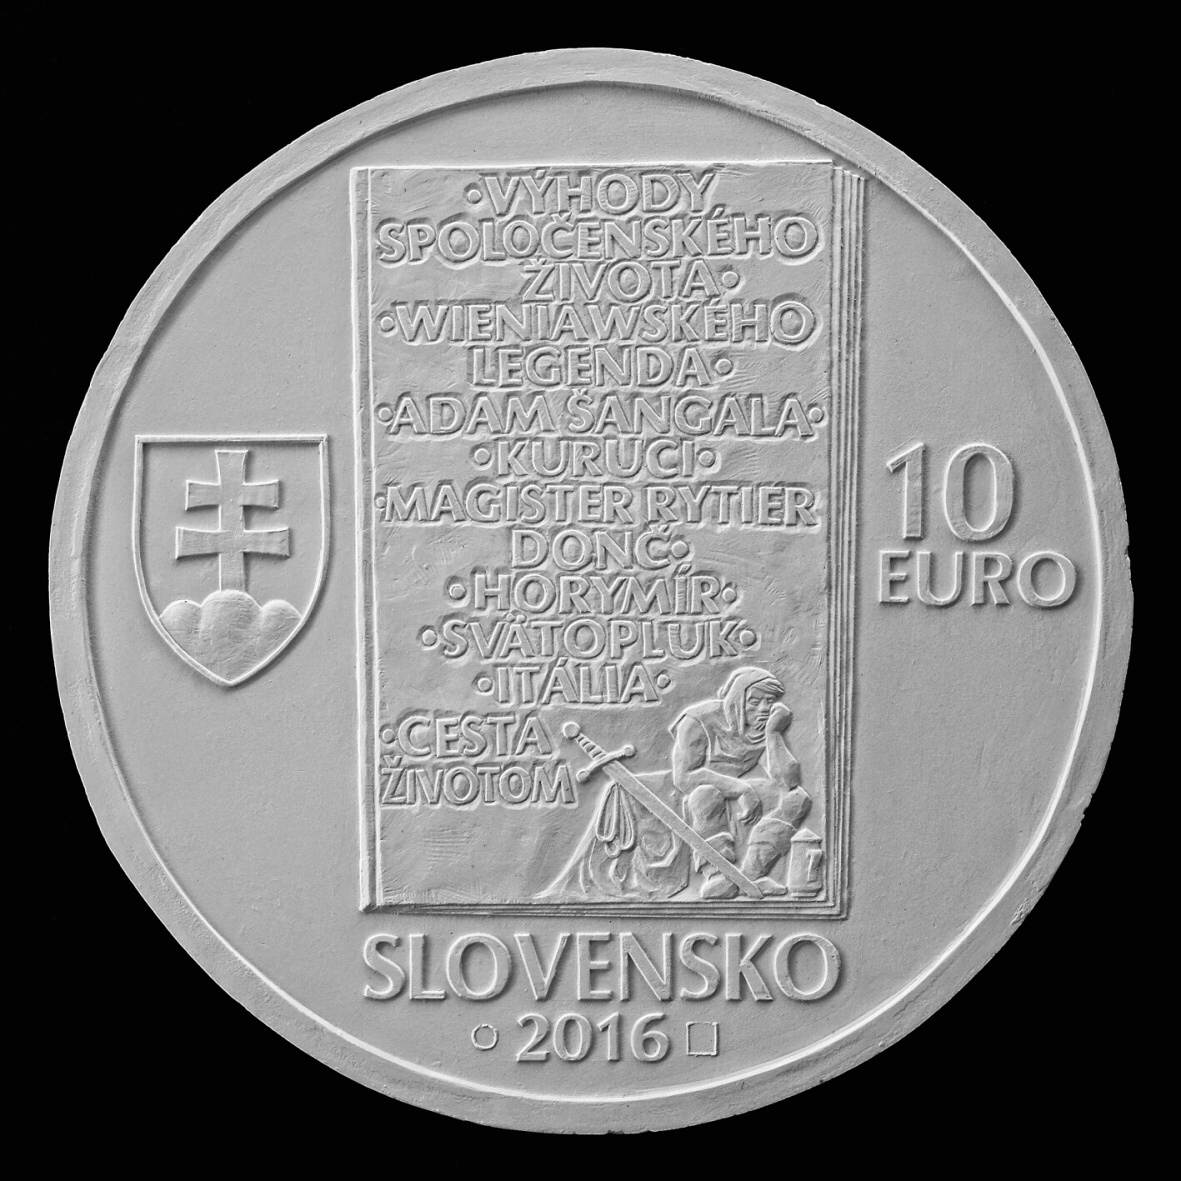 Reduced first prize (design selected for the coin